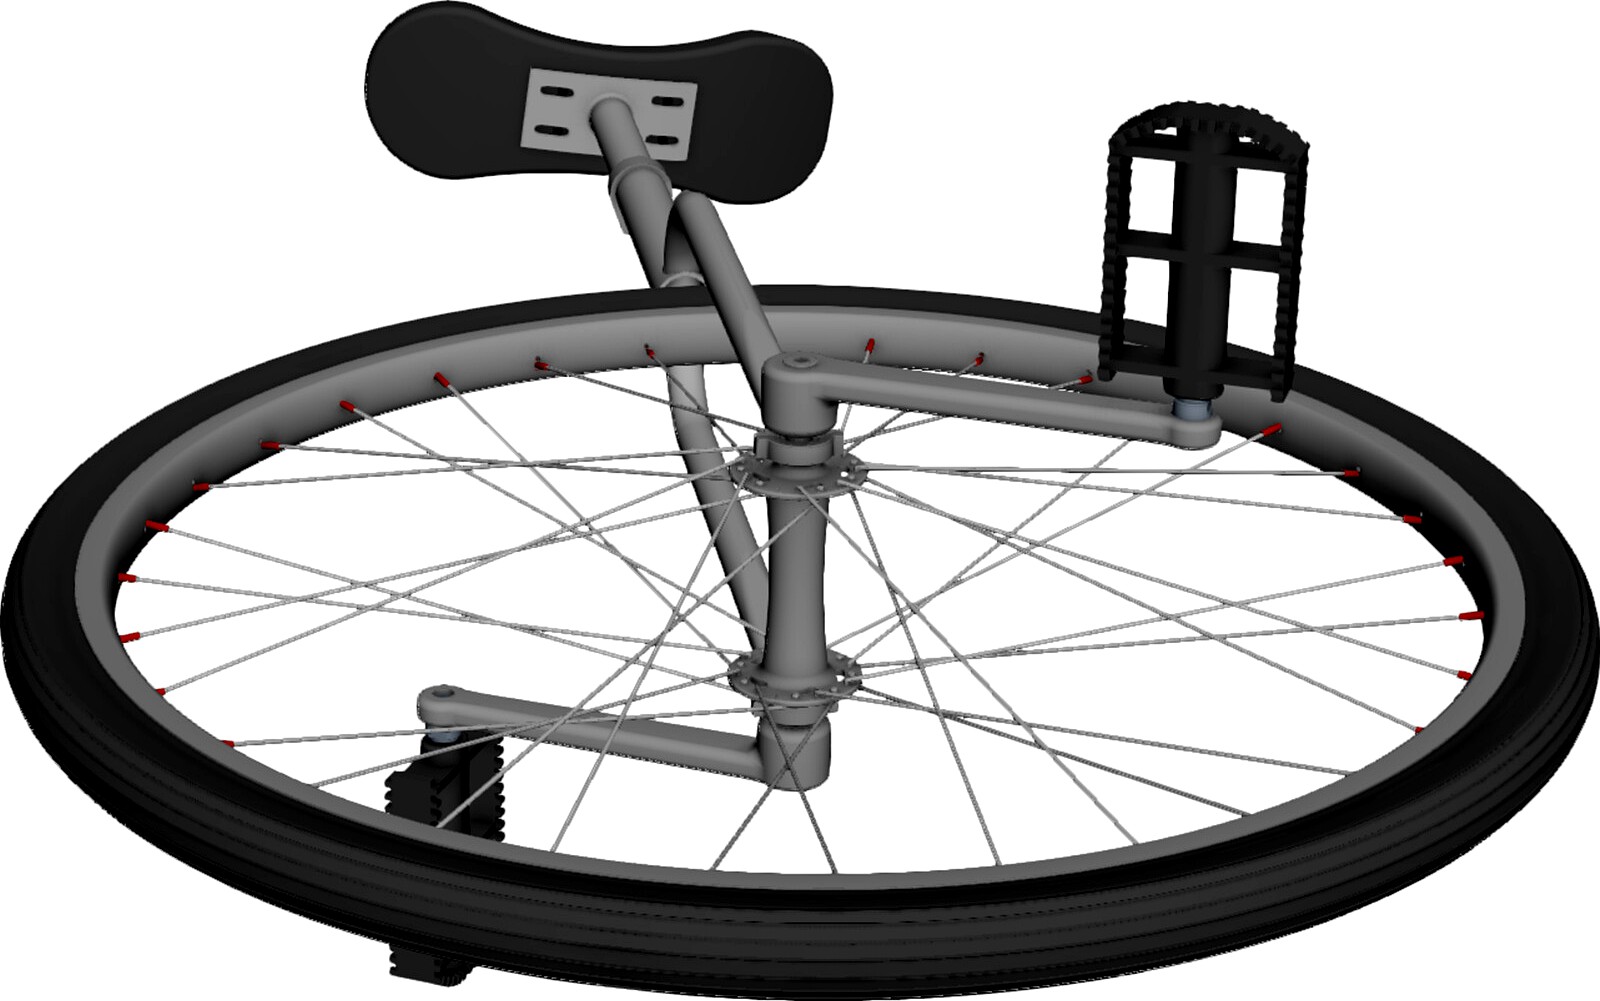 Unicycle 3D CAD Model